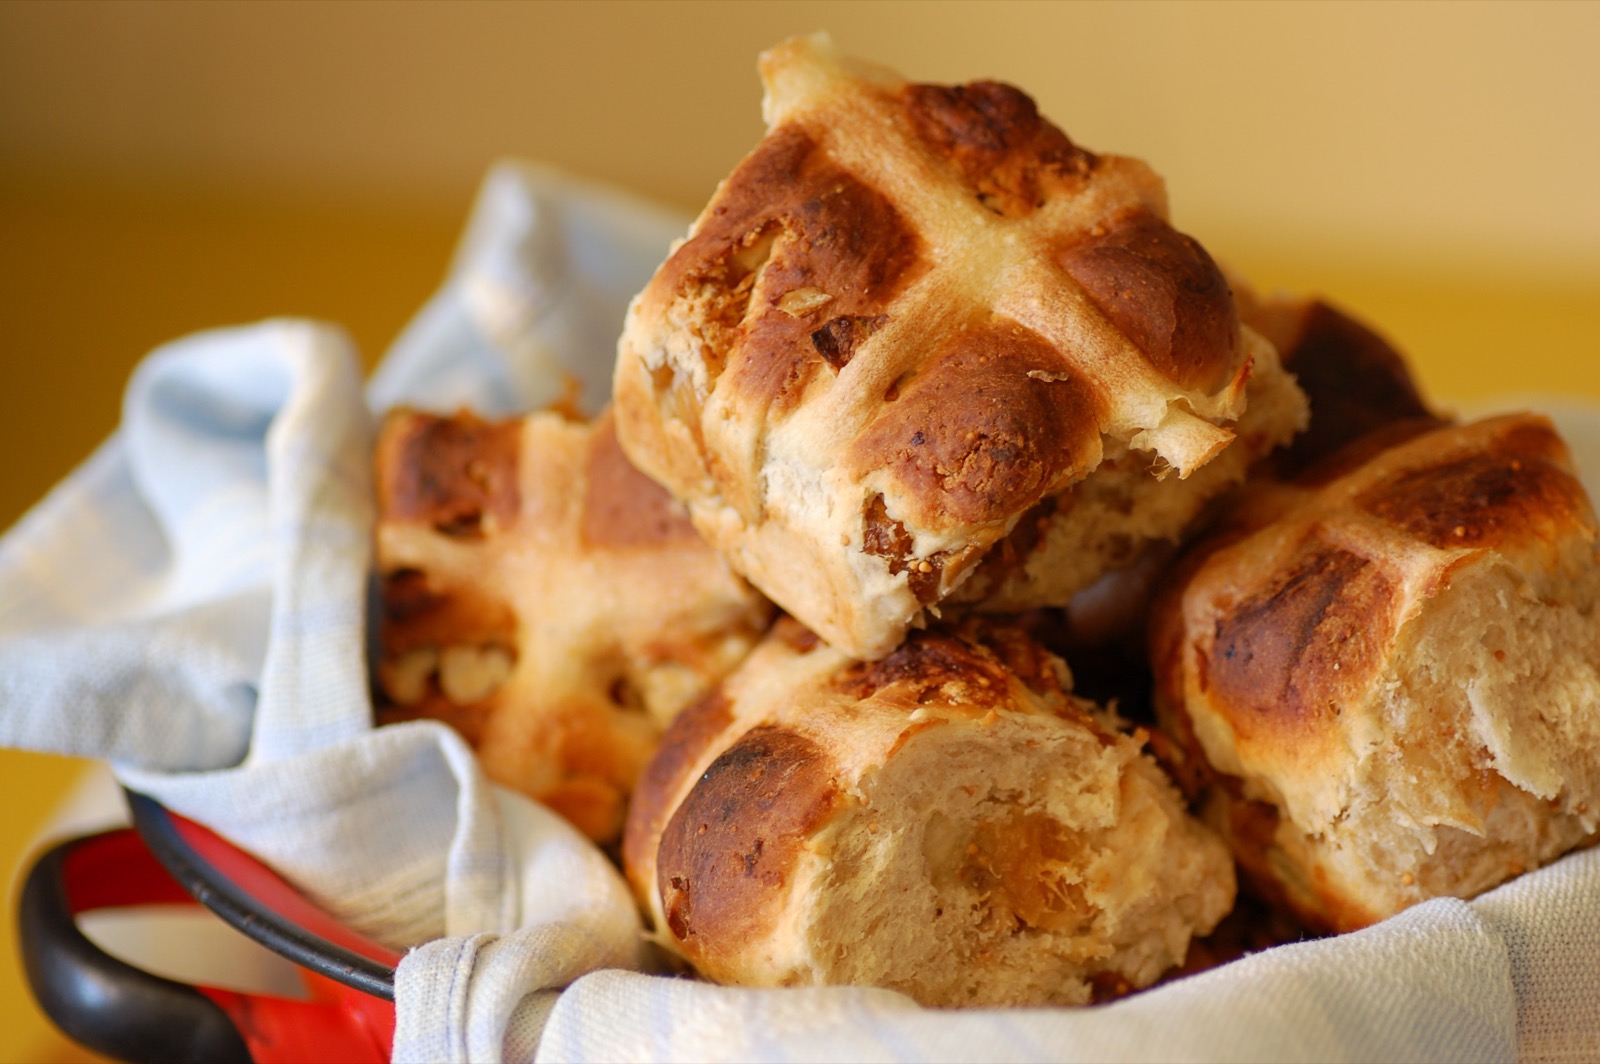 🥐 Here Are 24 Baked Treats from Around the World – Can You Find Them on the Map? Hot Cross Bun